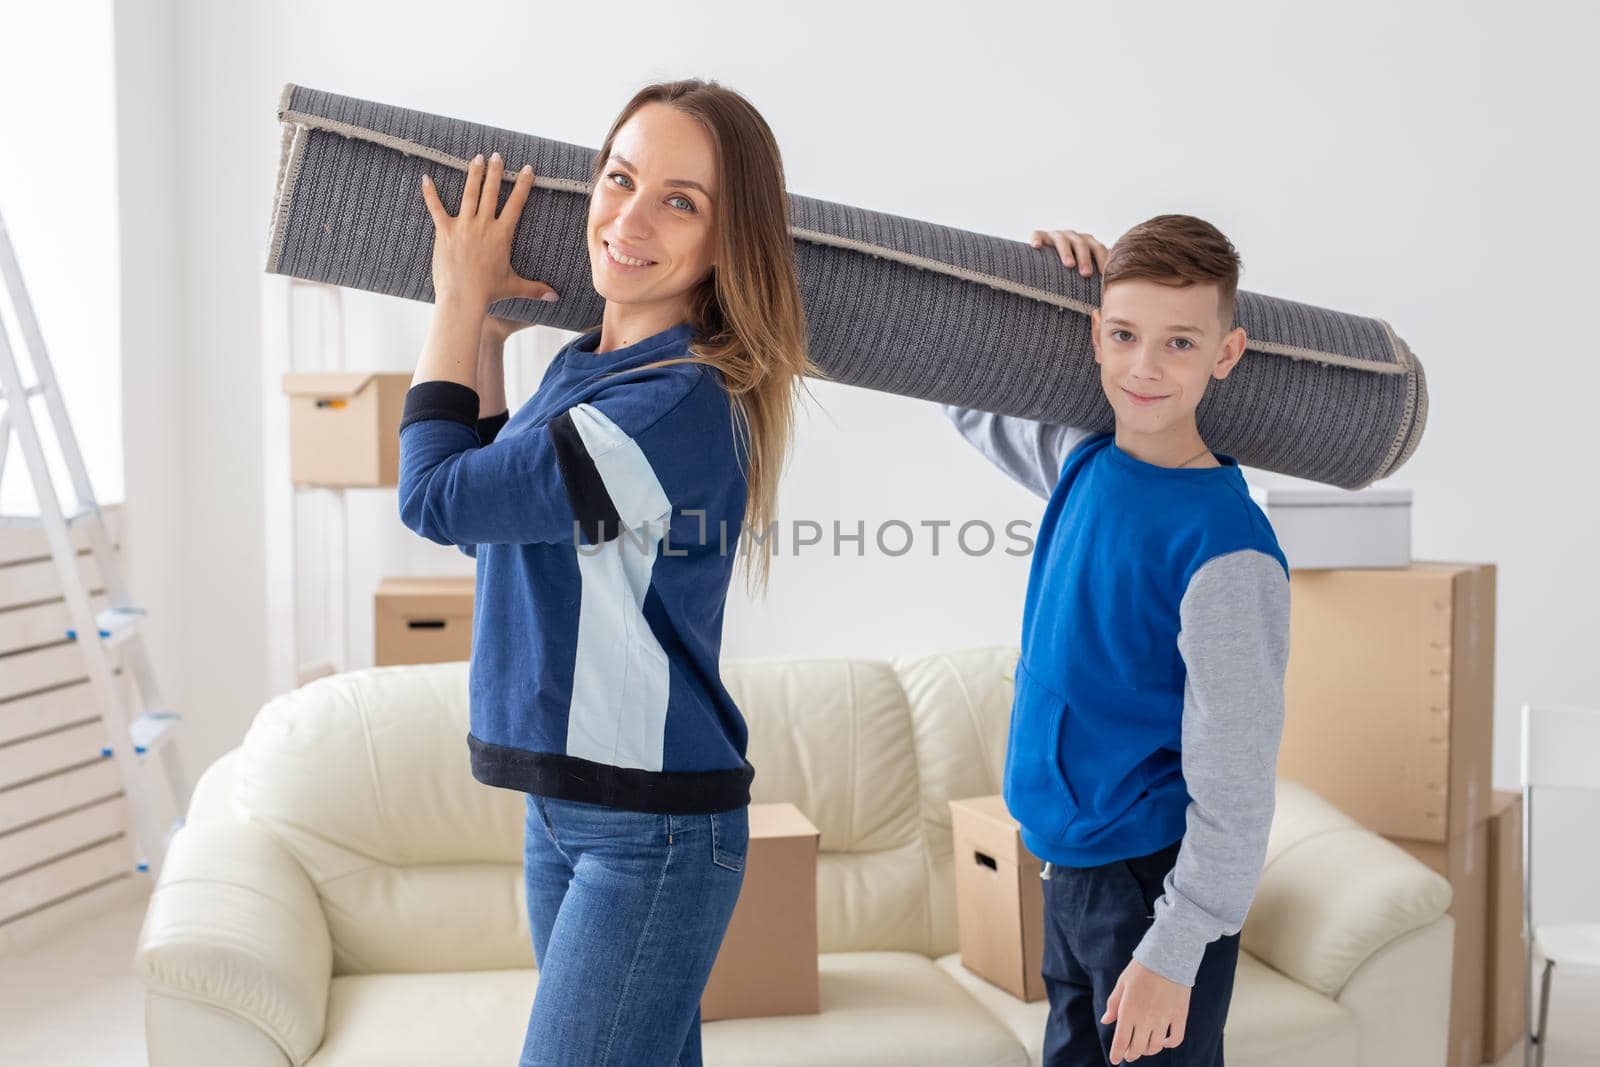 Smiling caucasian mother and a charming son are holding a folded carpet on their shoulders in a new living room intending to spread it in a new apartment. Housewarming concept